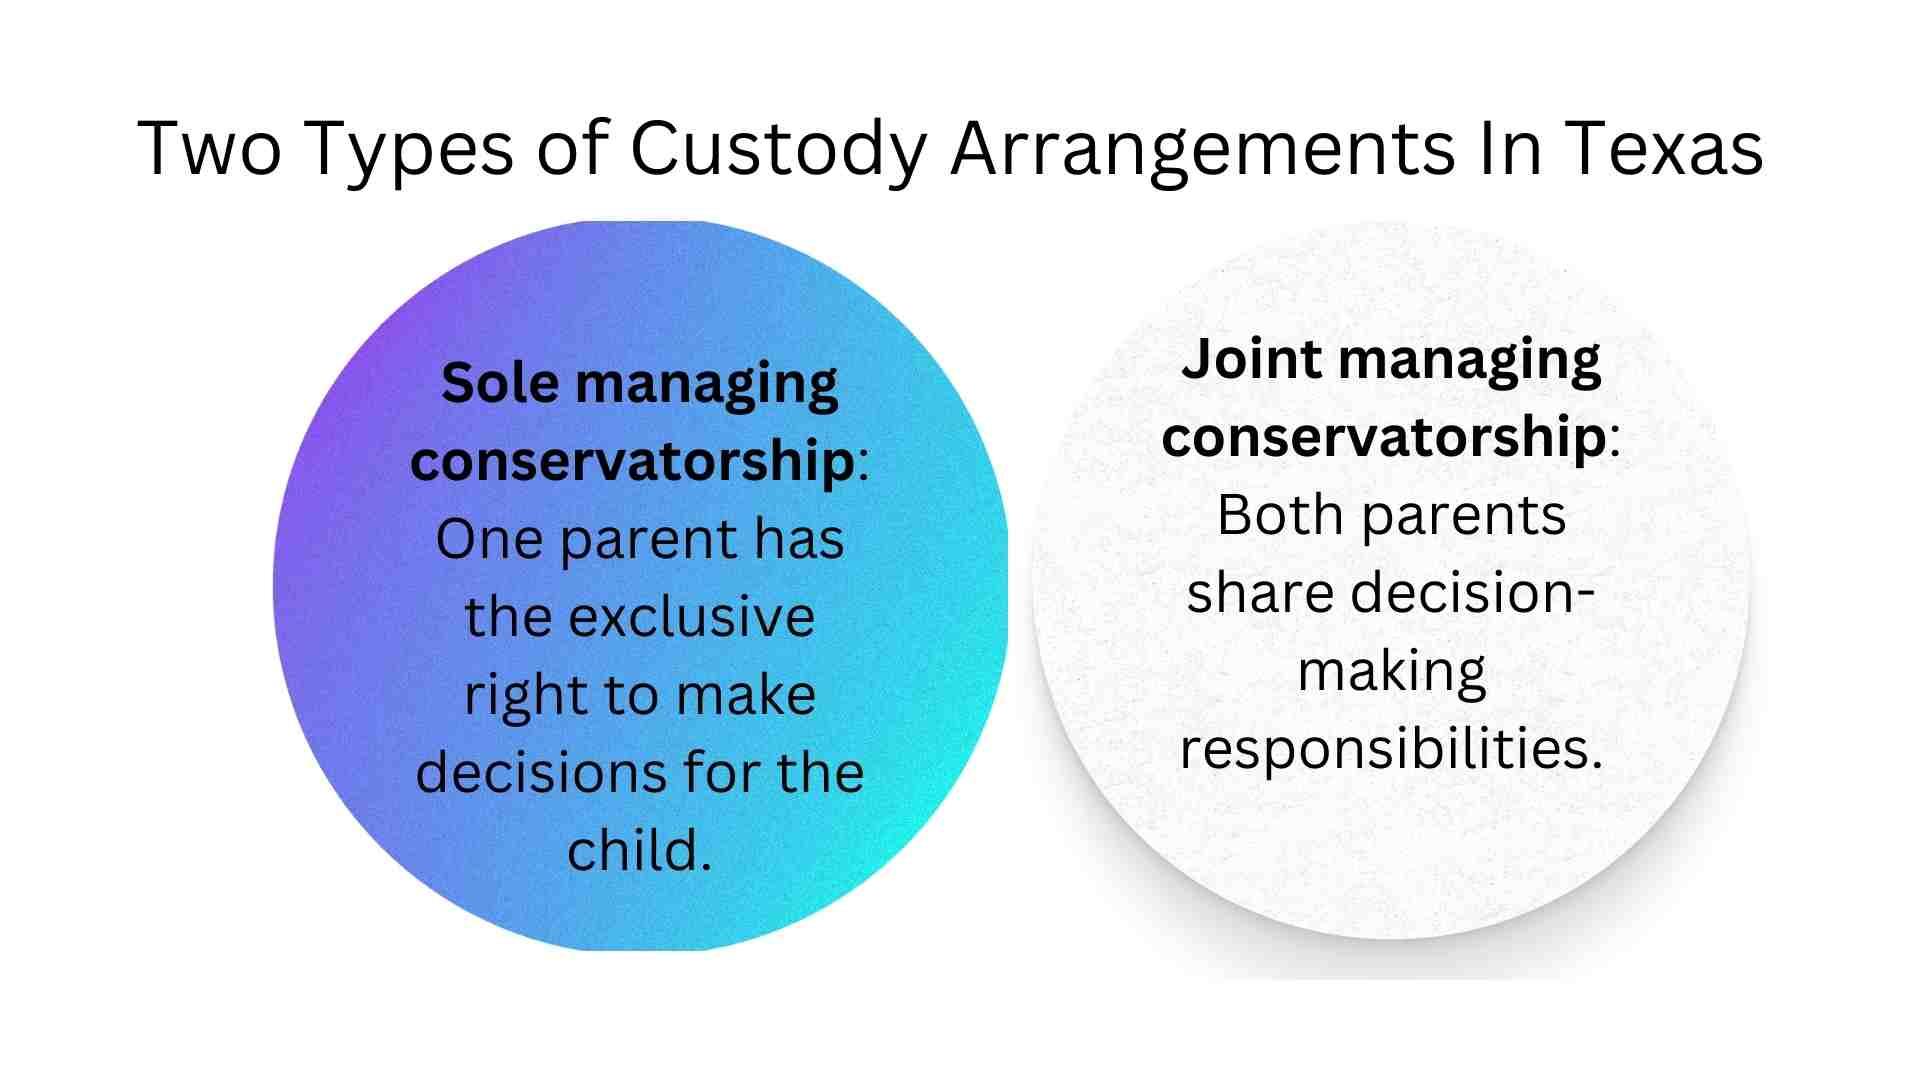 Two types of custody arrangements in Texas are shown: Sole managing conservatorship (one parent decides) and Joint managing conservatorship (both parents share decisions).